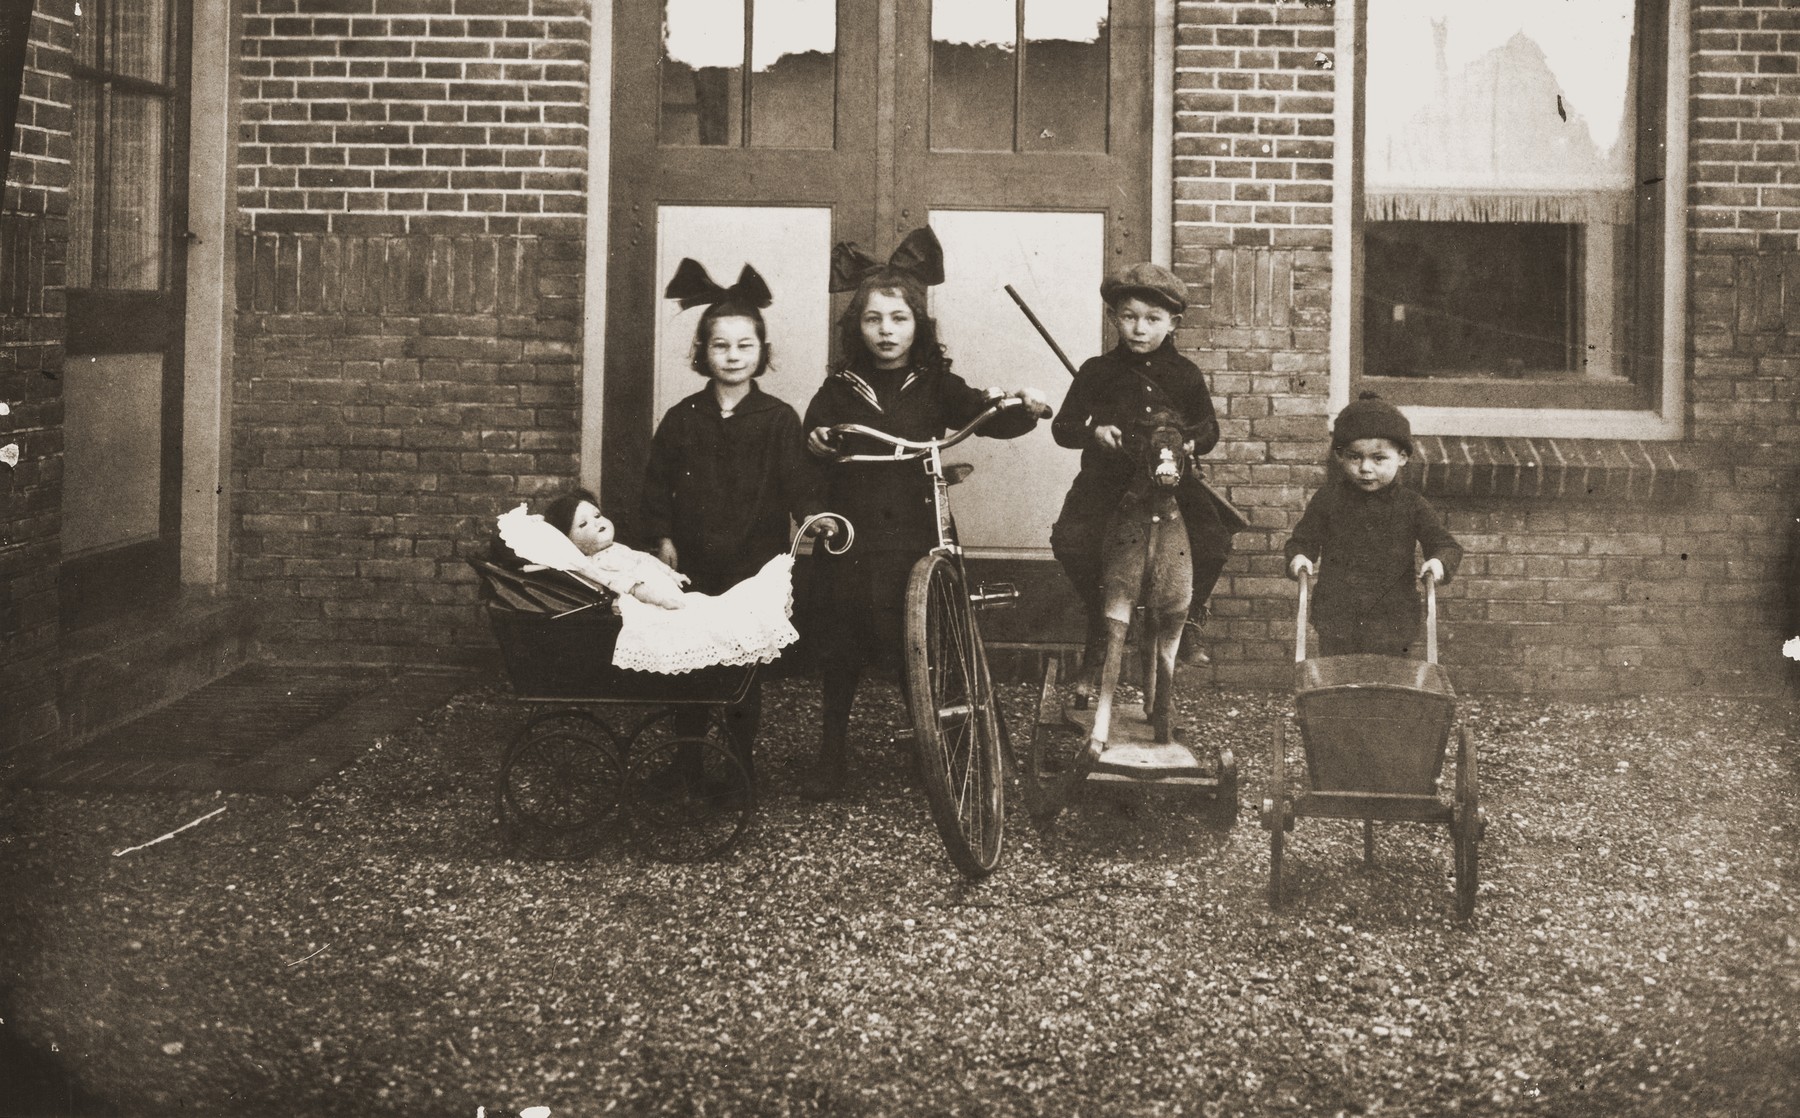 The four children of Louis and Ida Meijer playing in back of their family home in Boekelo.

Pictured from left to right are: Johanna, Bettie, Michel and Izak Meijer.  All were killed during the Holocaust.